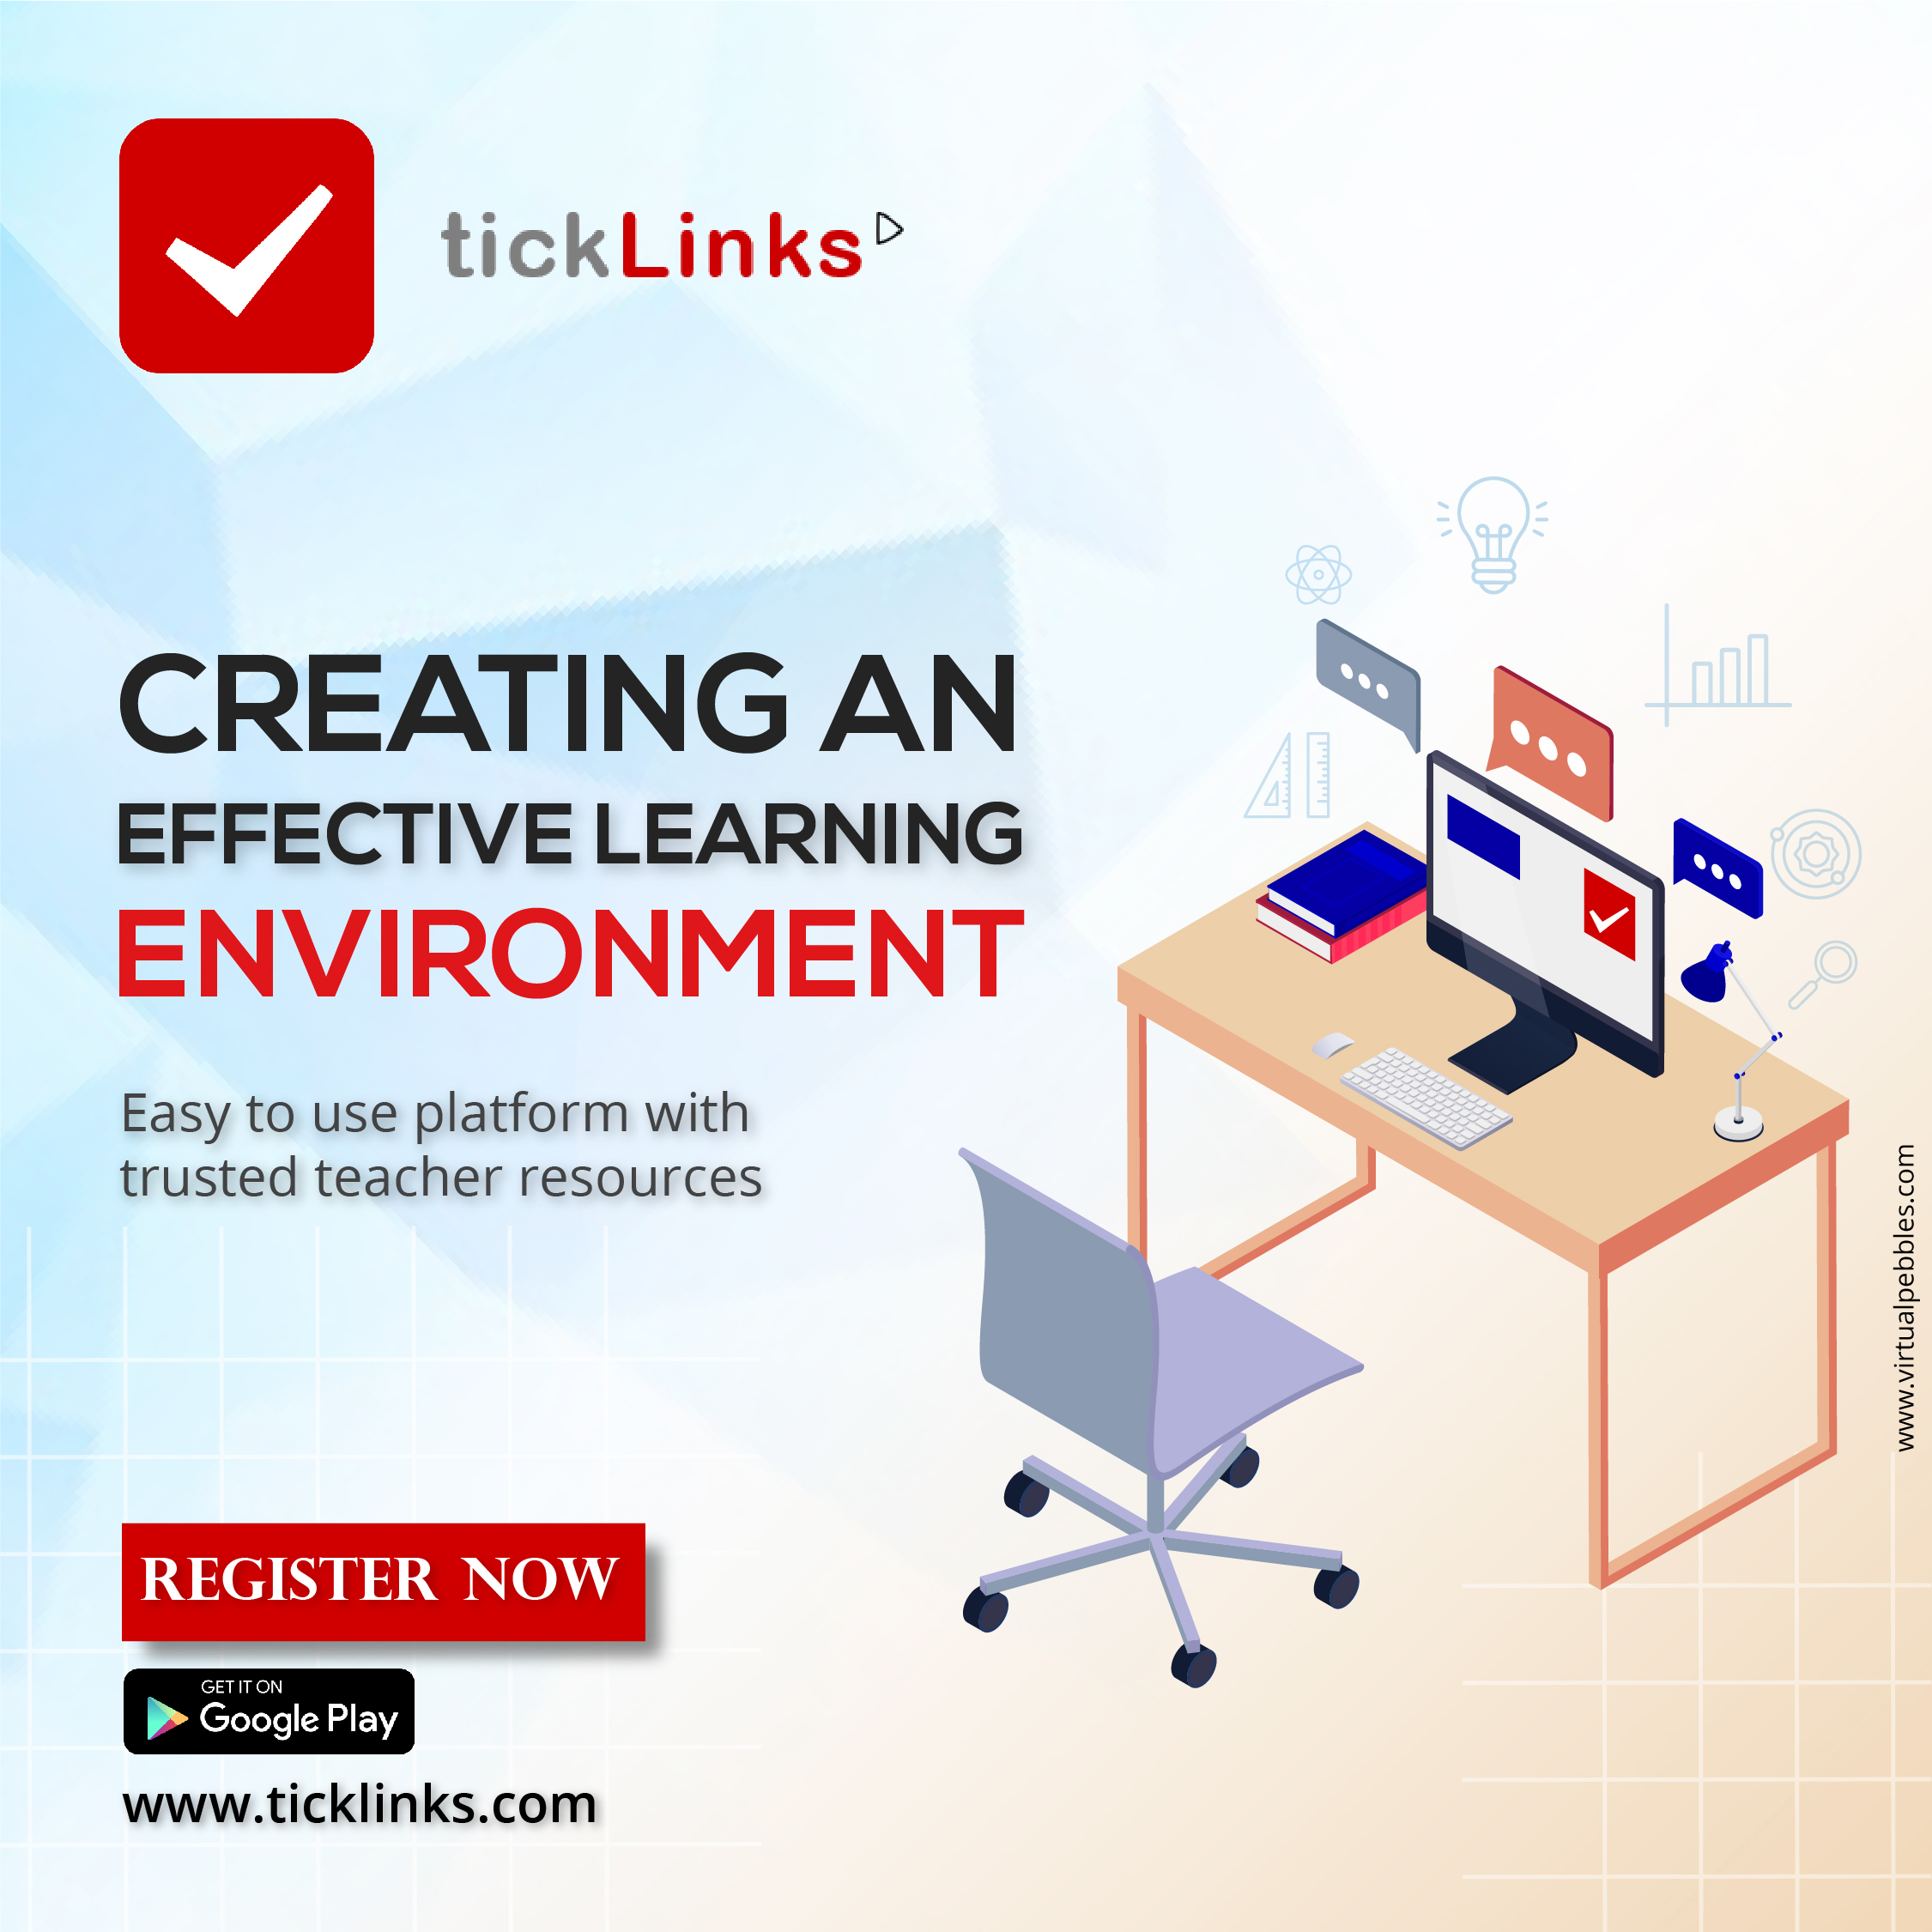 CBSE Board Curriculum - tickLinks Partner with Bharti Foundation - Central Board of Secondary Education